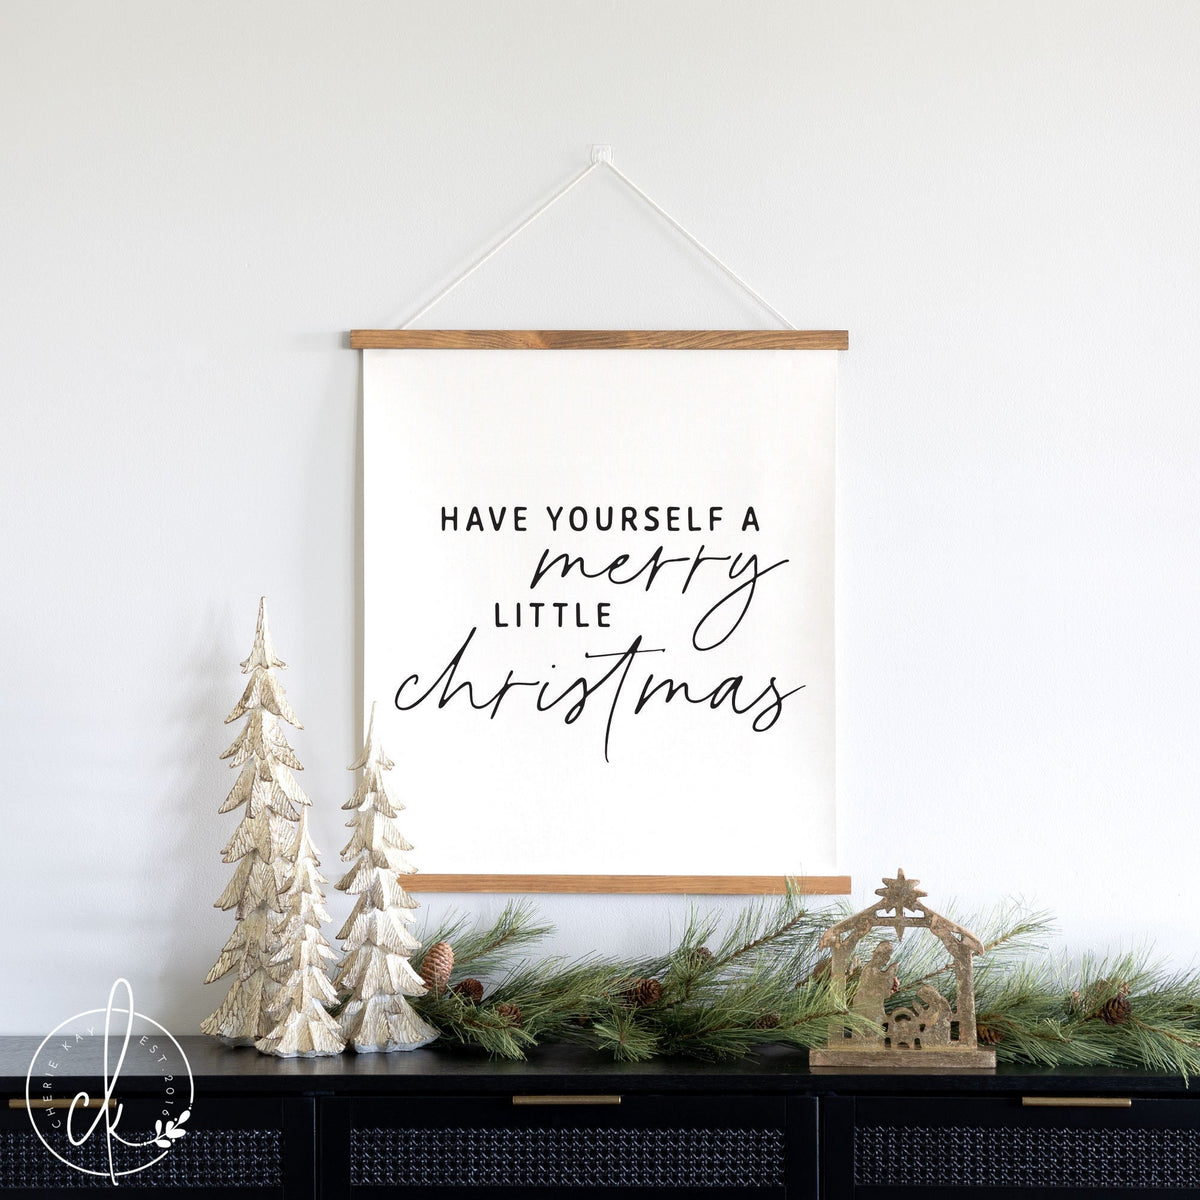 Have Yourself A Merry Little Christmas | Fabric Wall Hanging | Christmas Wall Art | Christmas Wall Decor | Holiday Decor